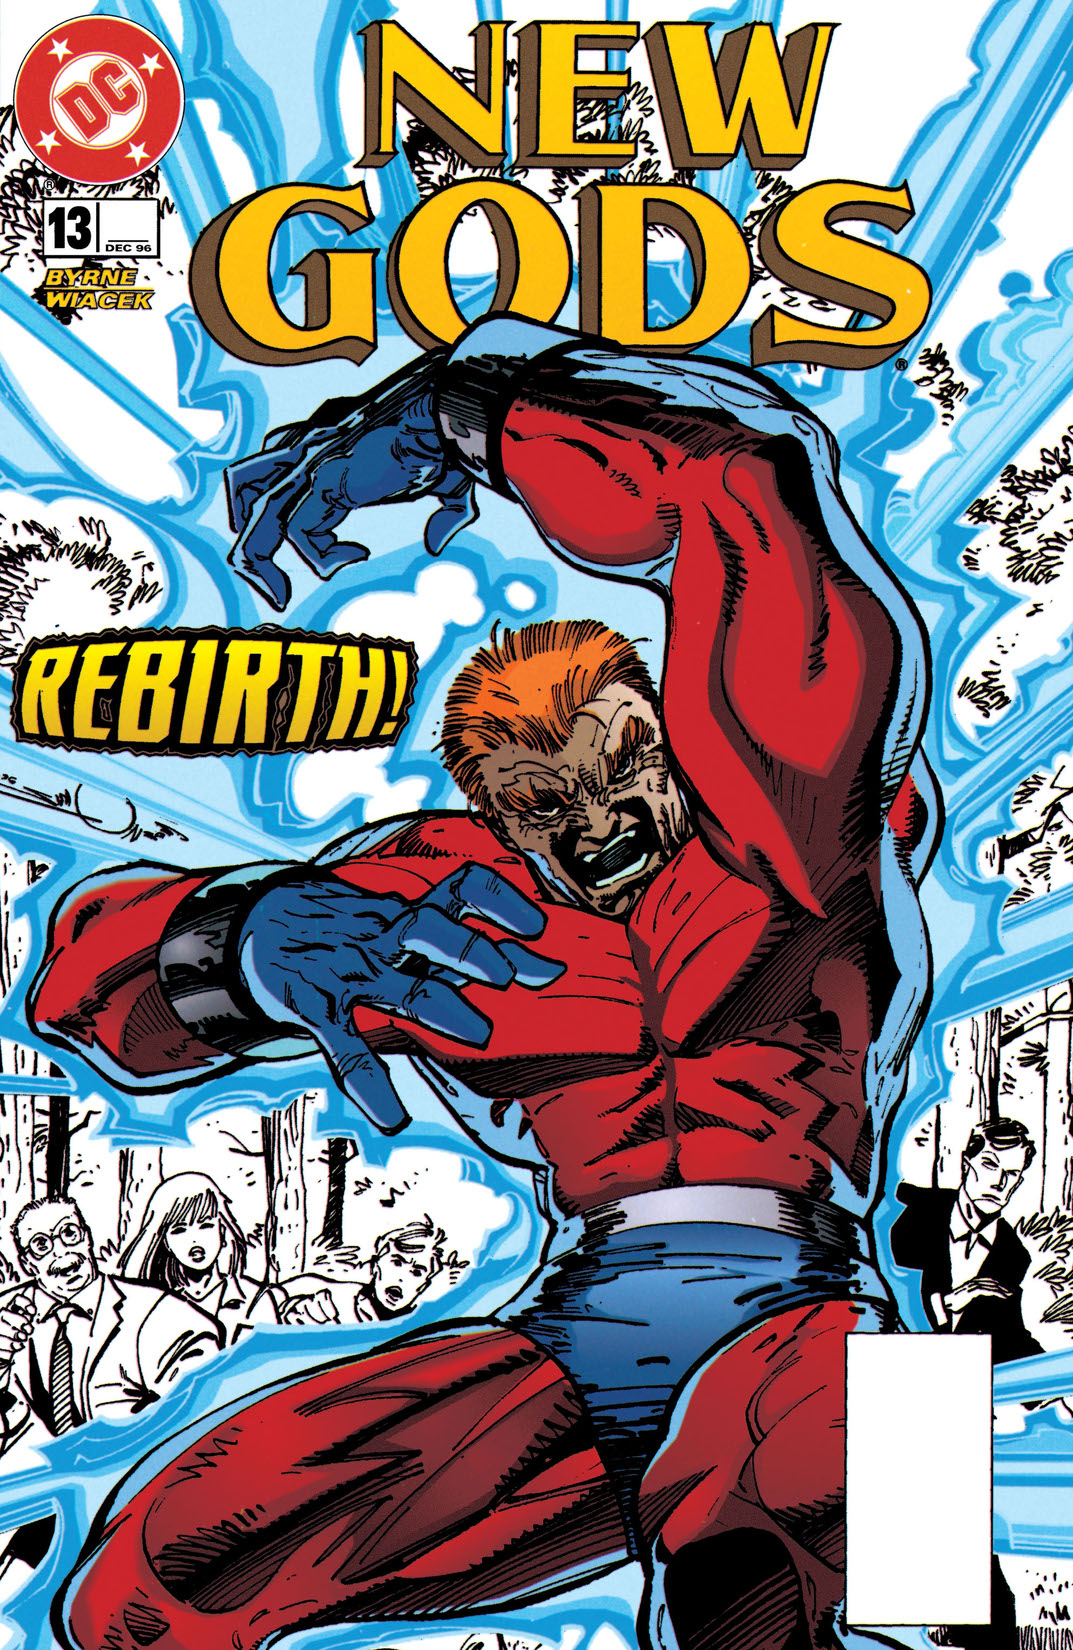 New Gods (1995-) #13 preview images